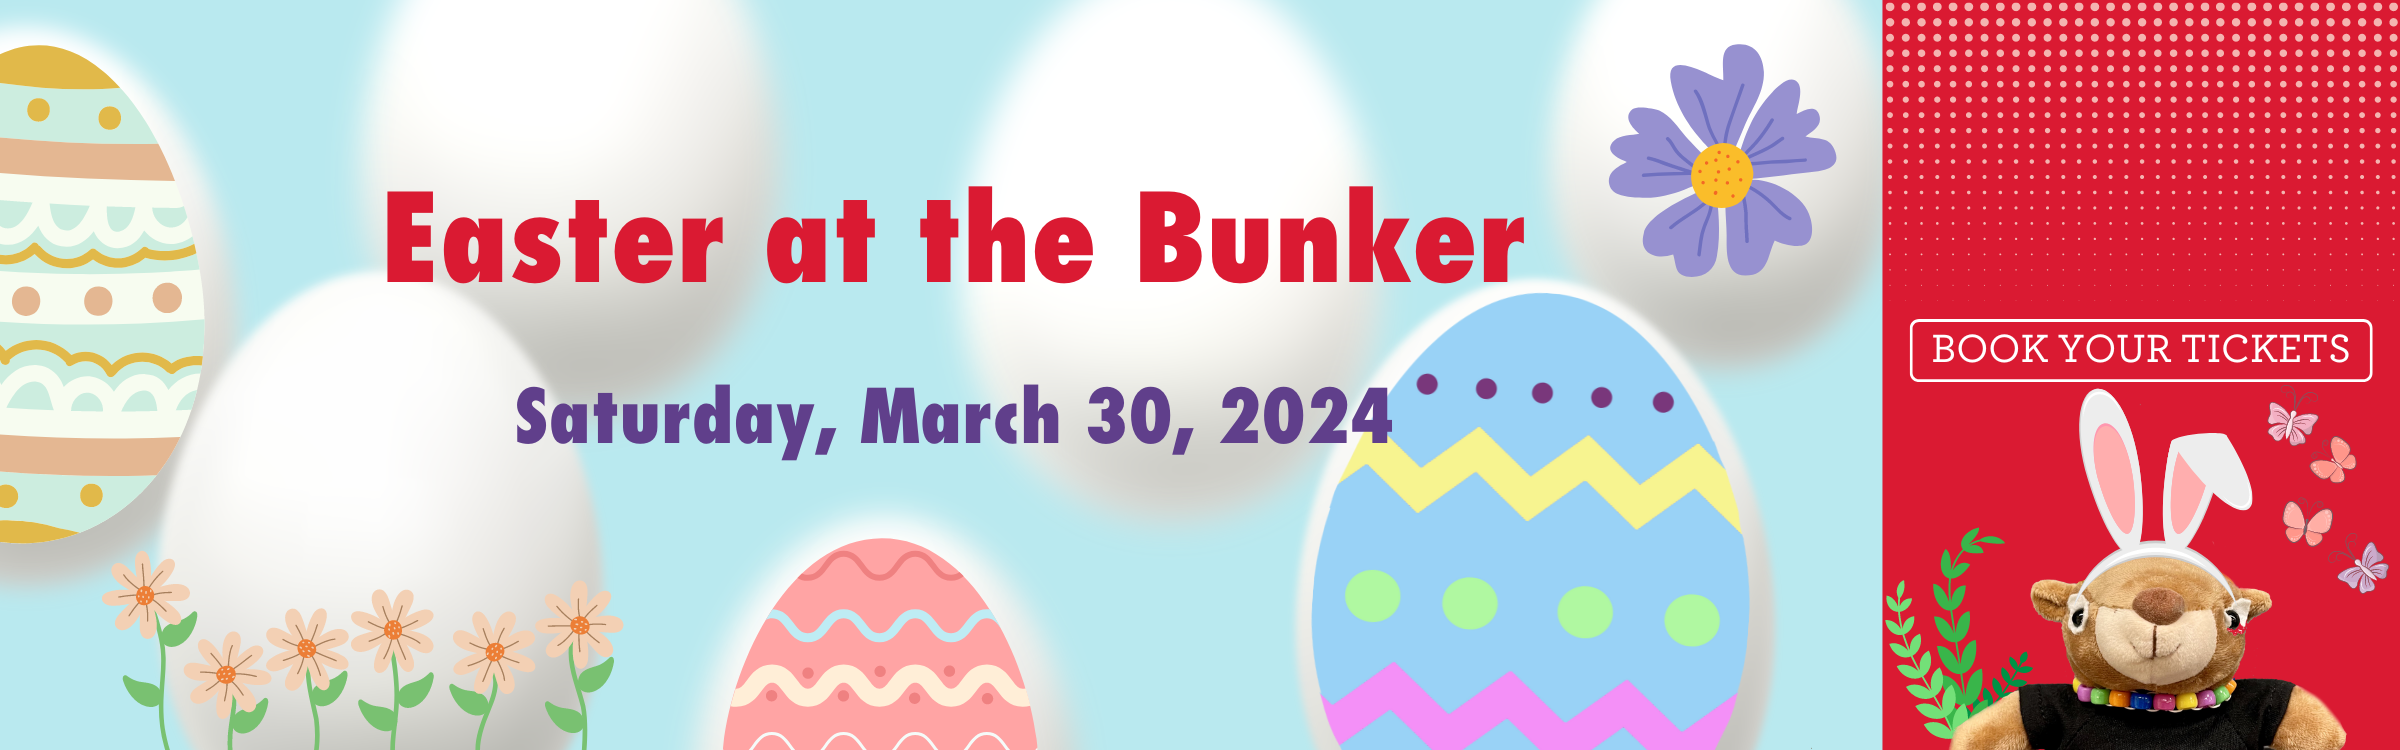 Easter-homepage-banner-1.png